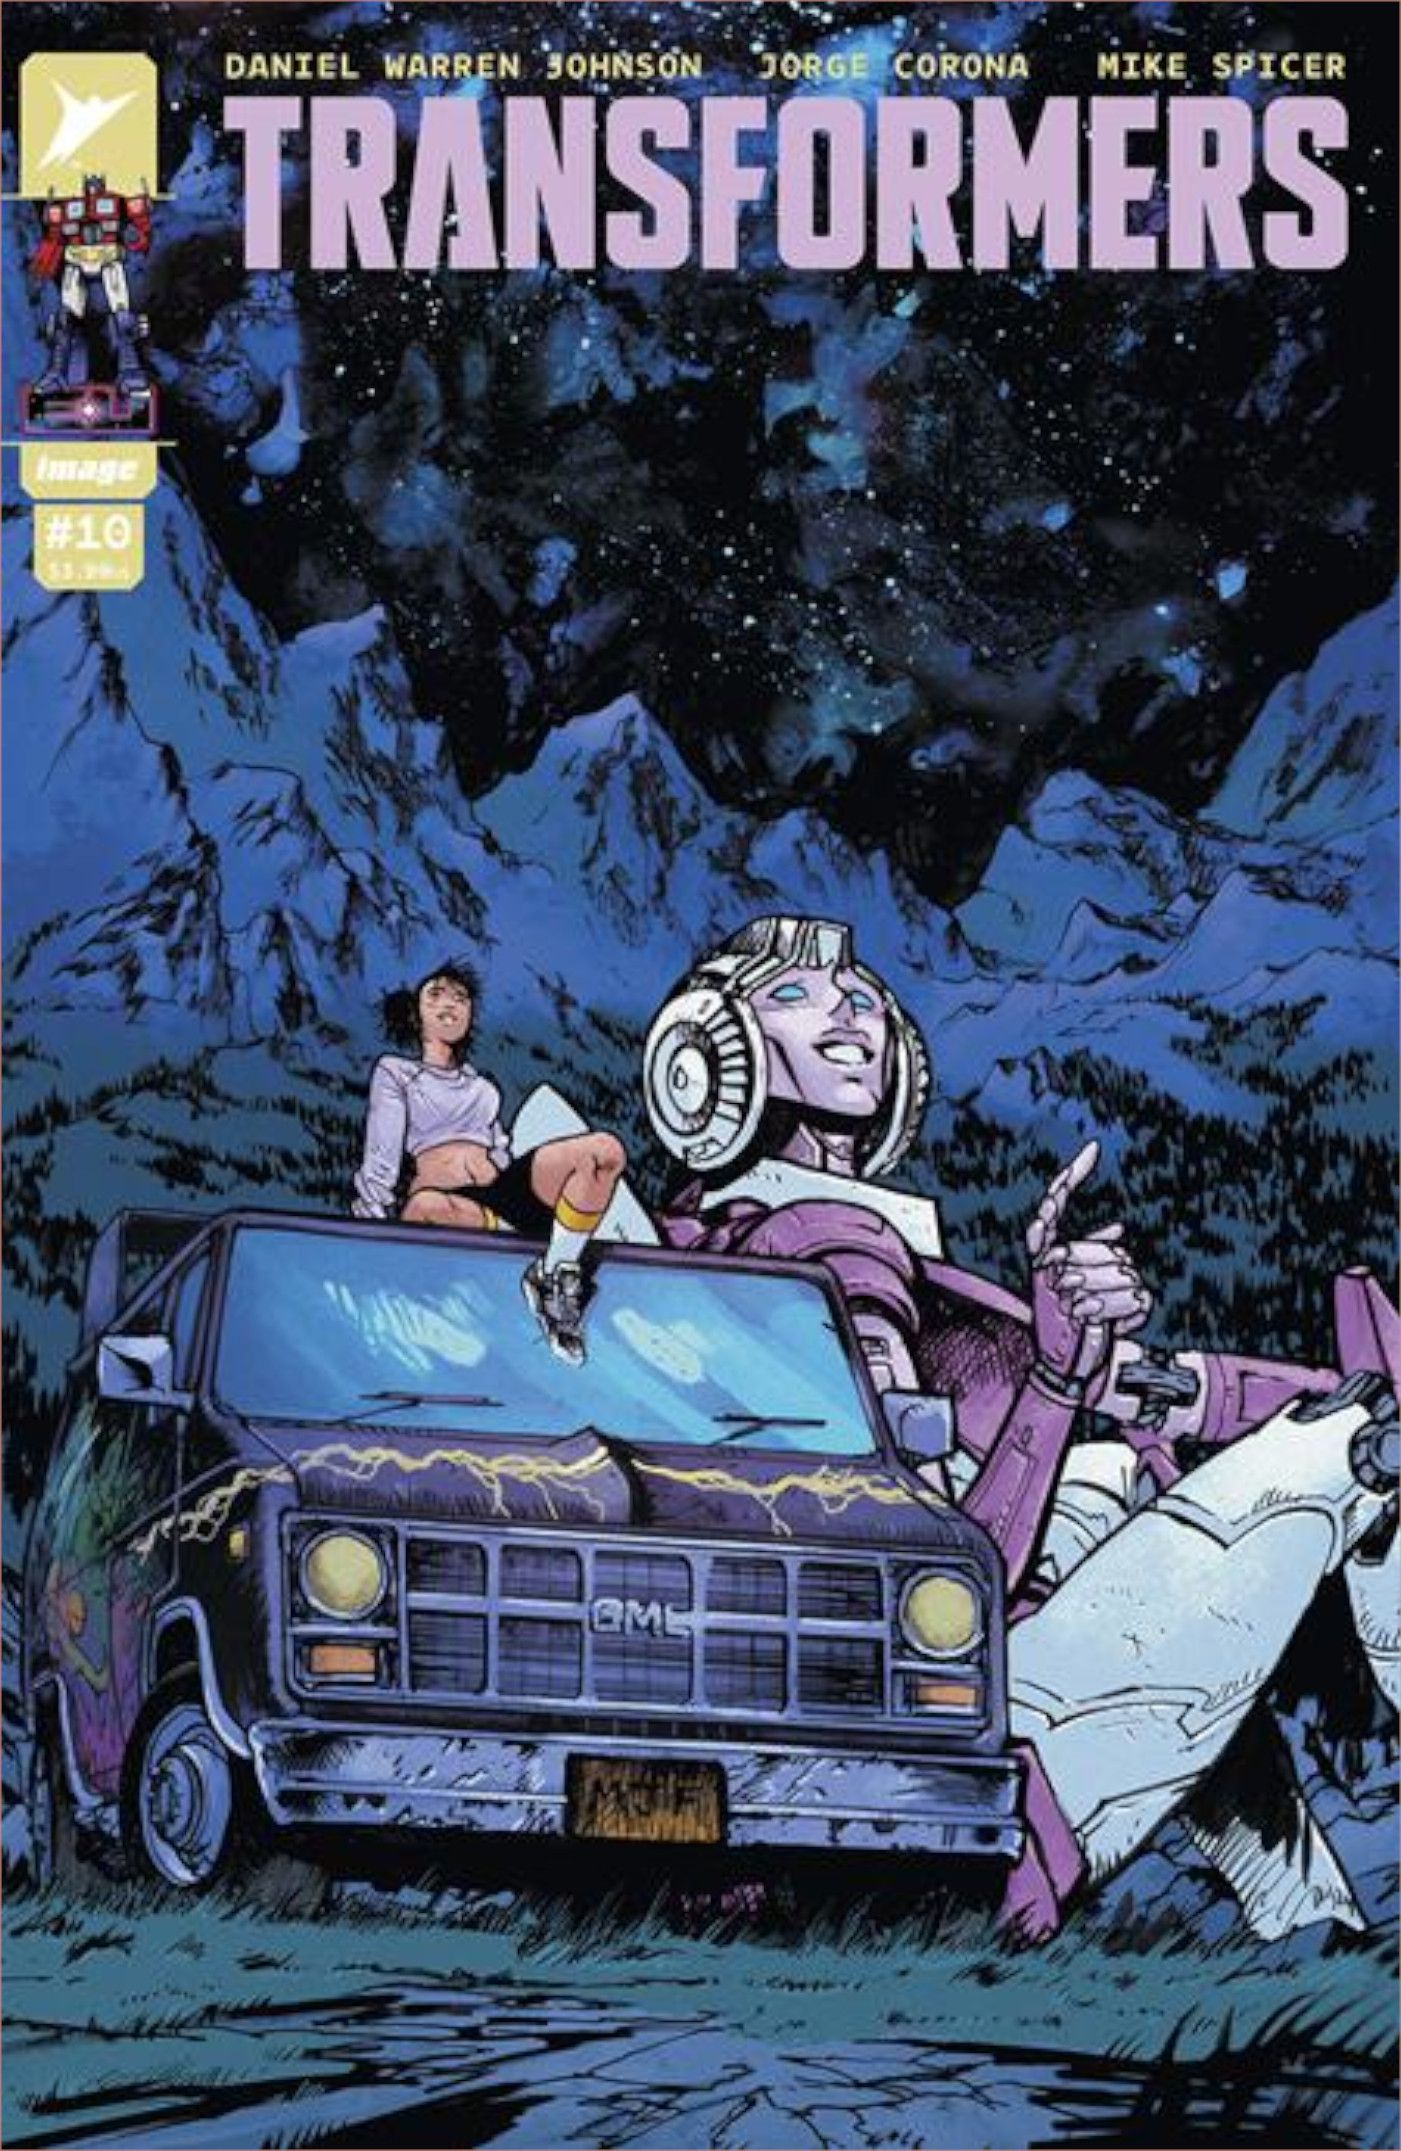 Transformers #10 cover by Daniel Warren Johnson, human and Autobot characters looking up at the stars.